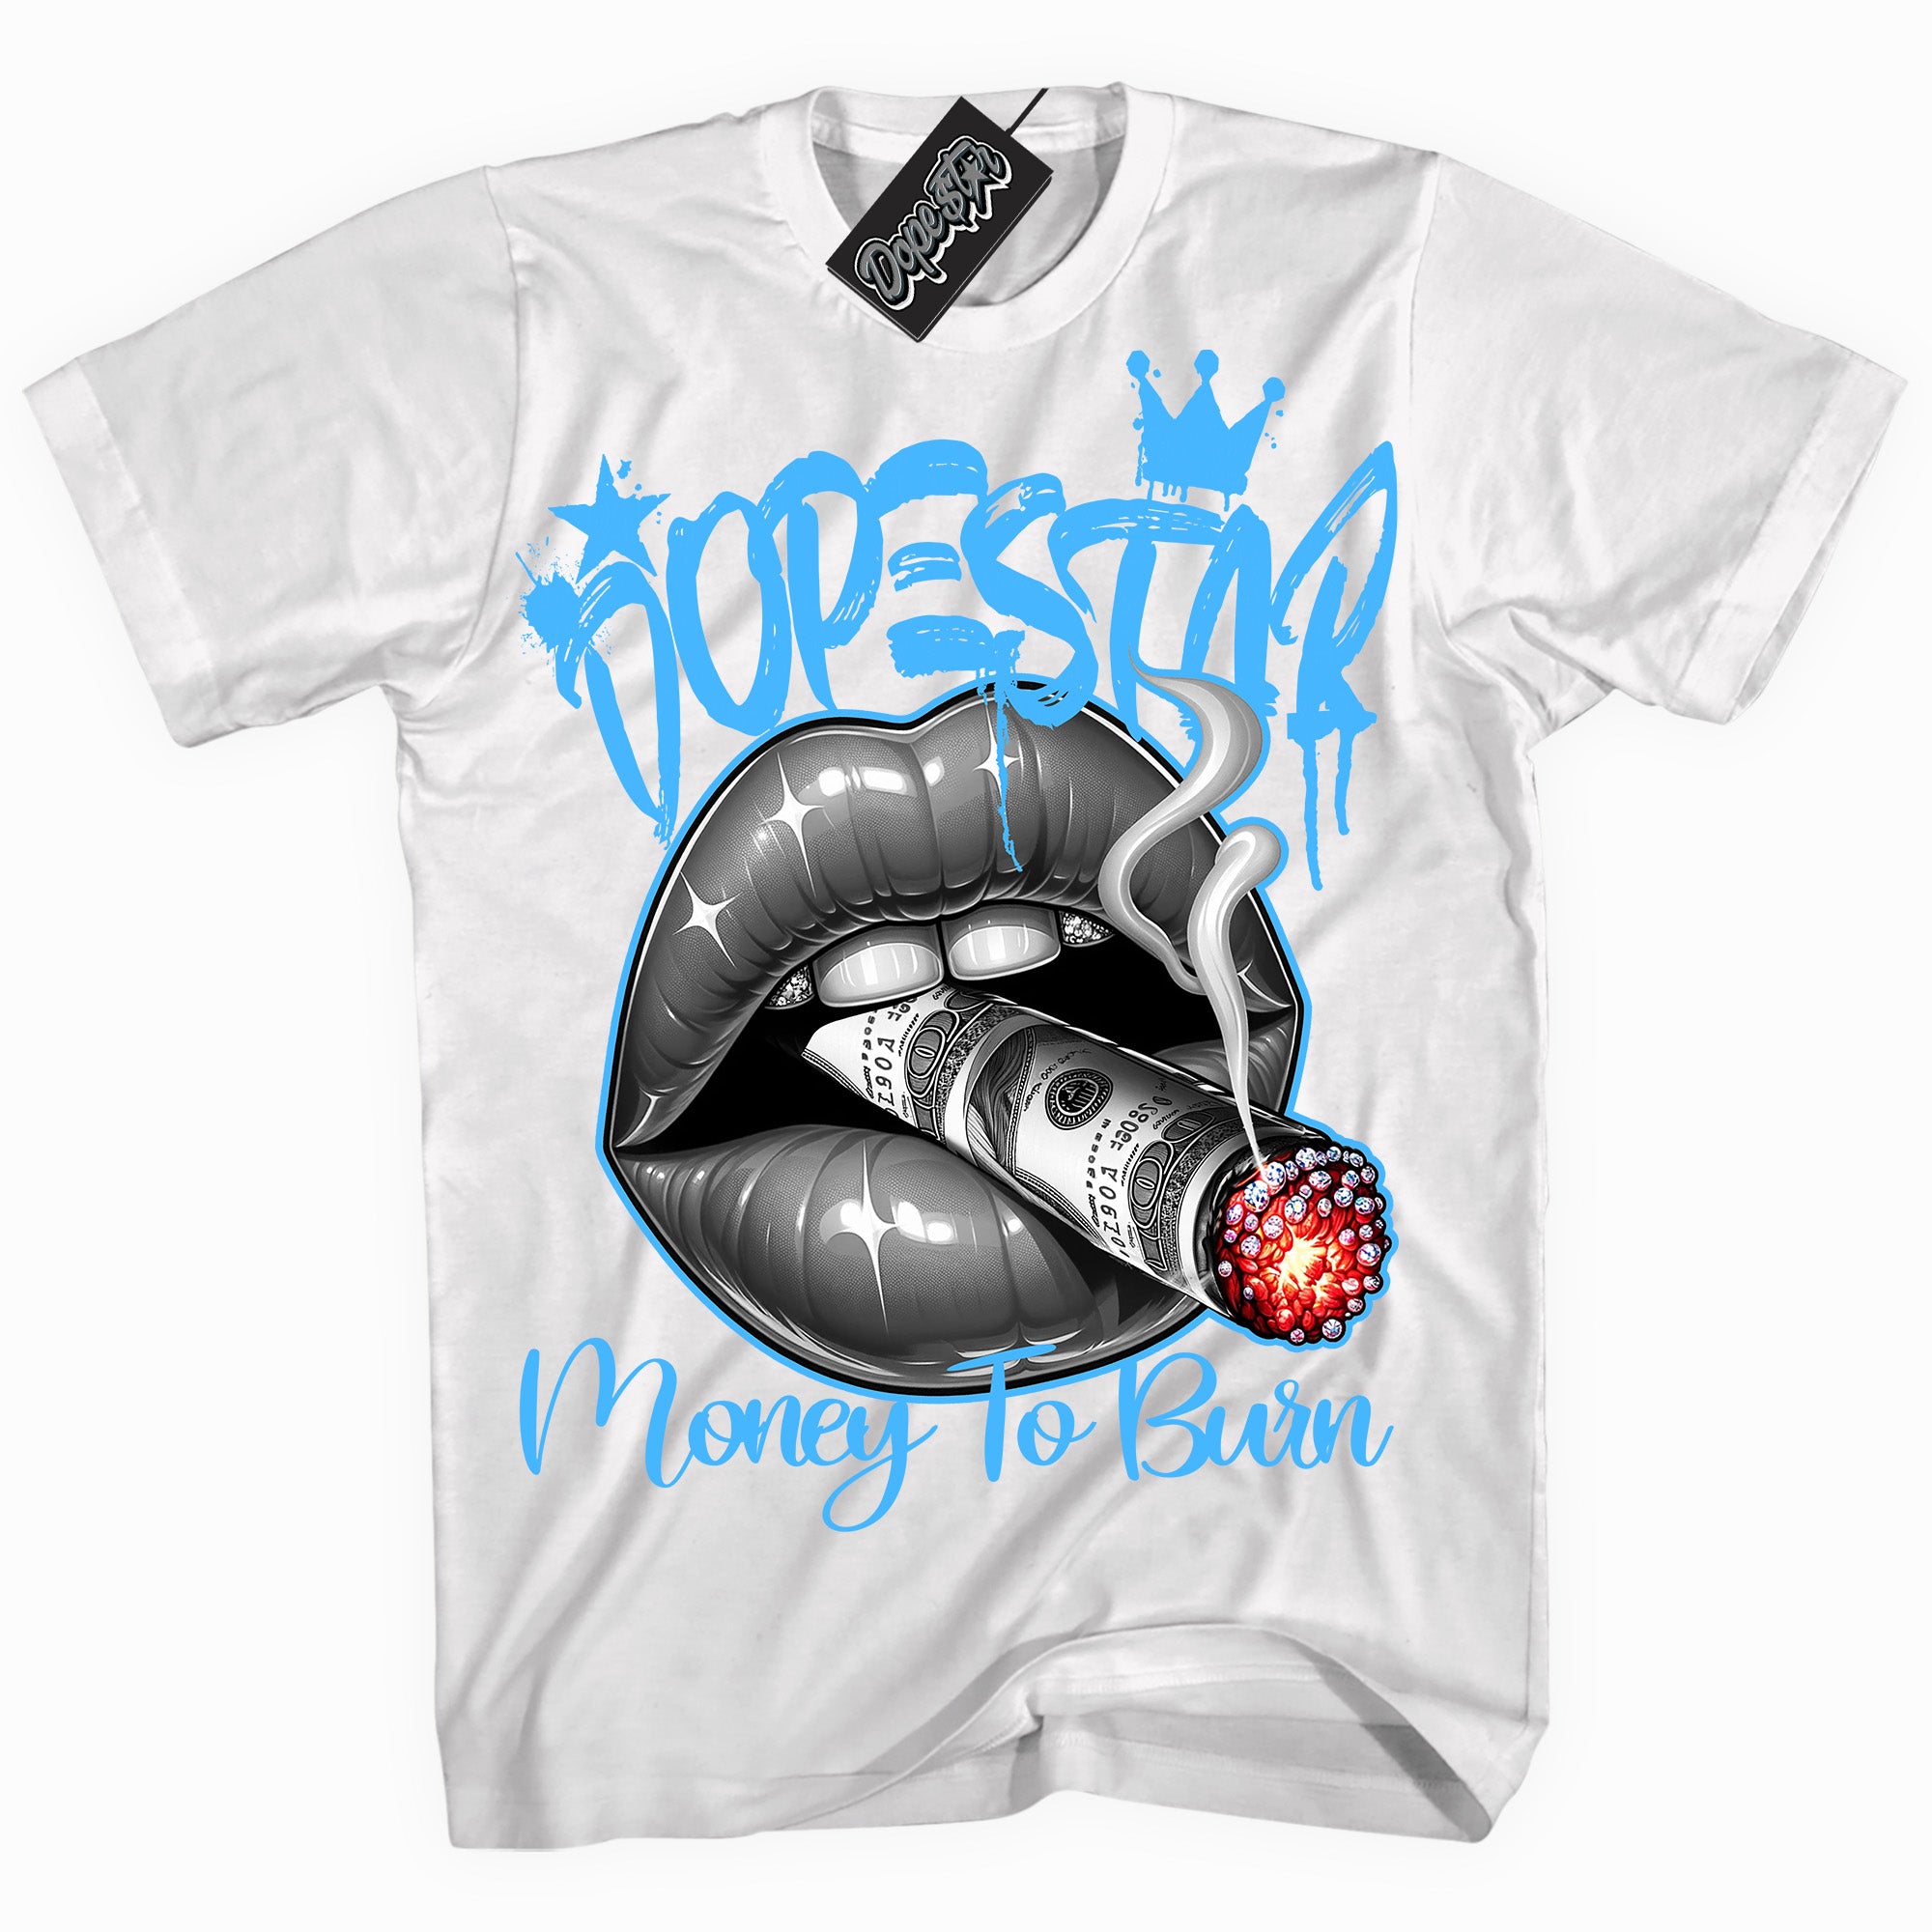 Cool White graphic tee with “ Money To Burn ” design, that perfectly matches Powder Blue 9s sneakers 